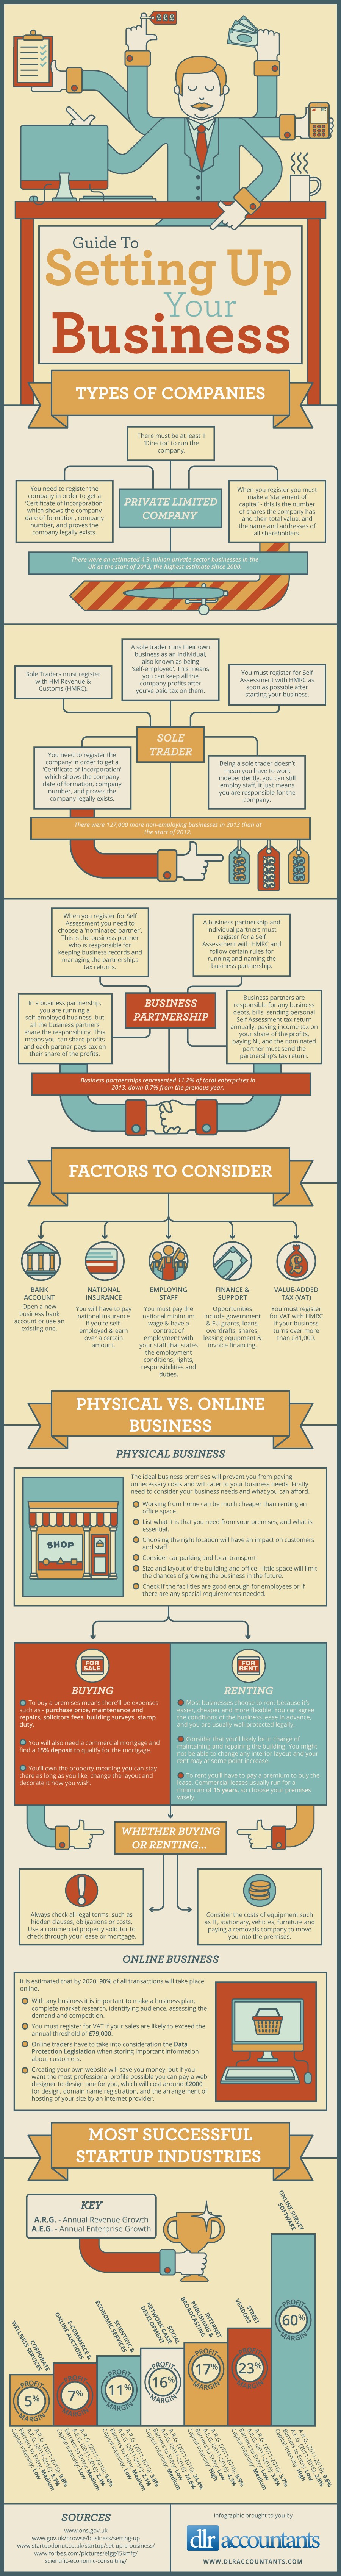 Guide To Setting Up Your Business #infographic